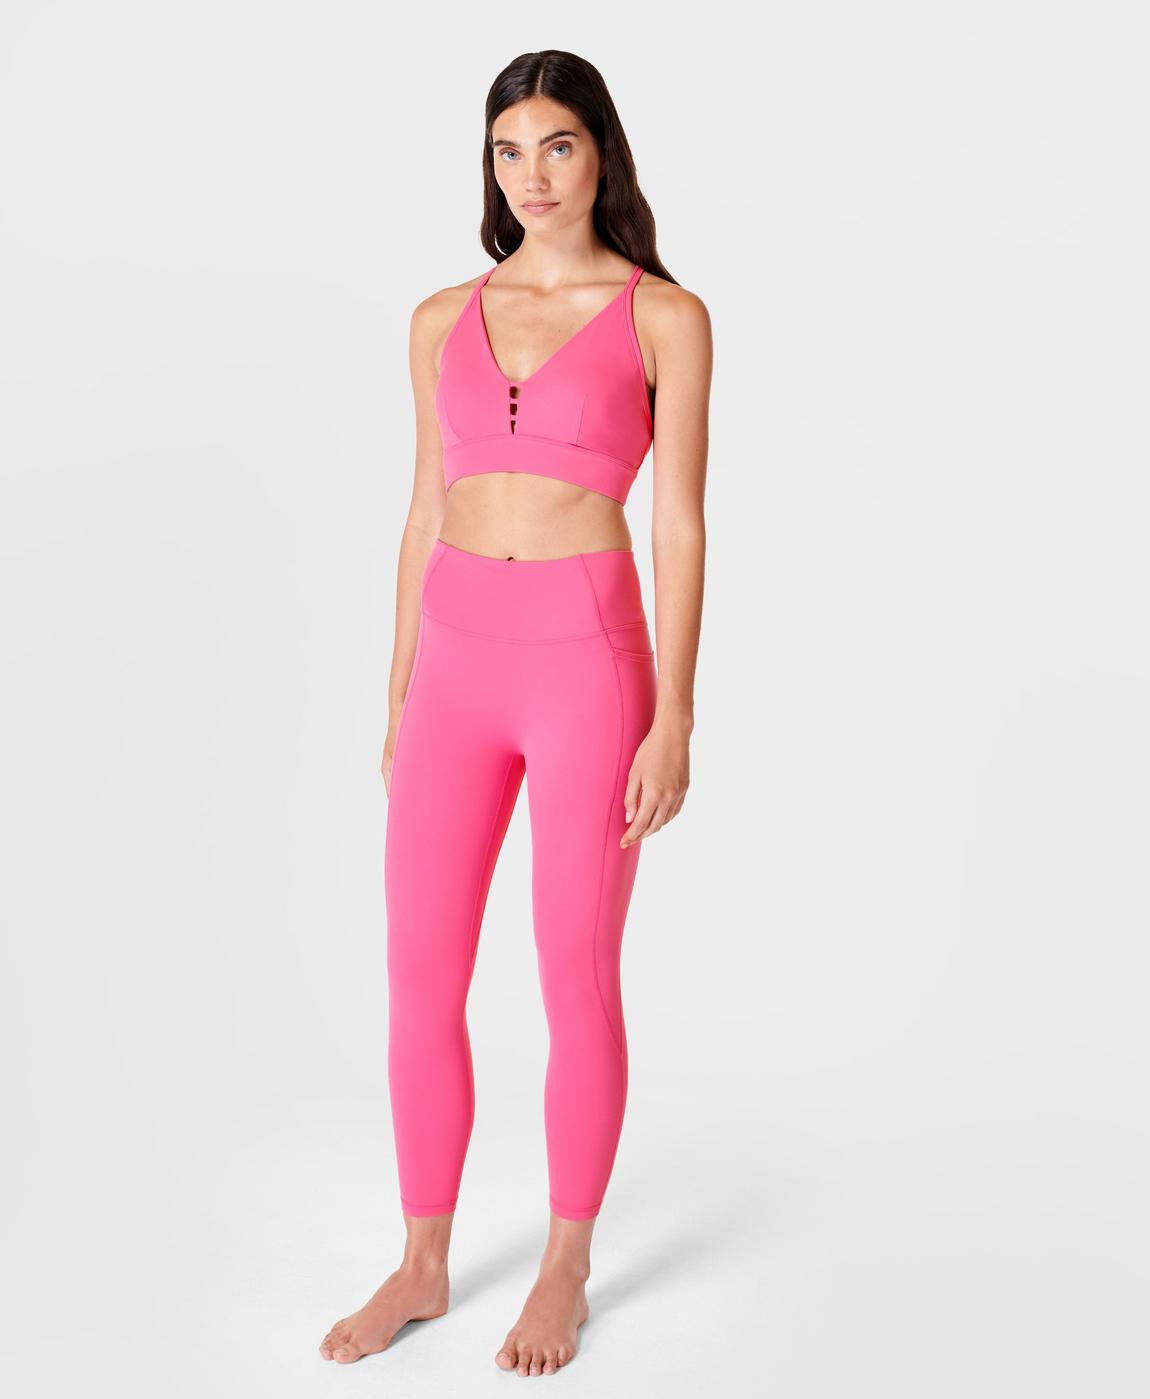 Super Soft 7/8 Leggings Colour Theory - Happy Pink